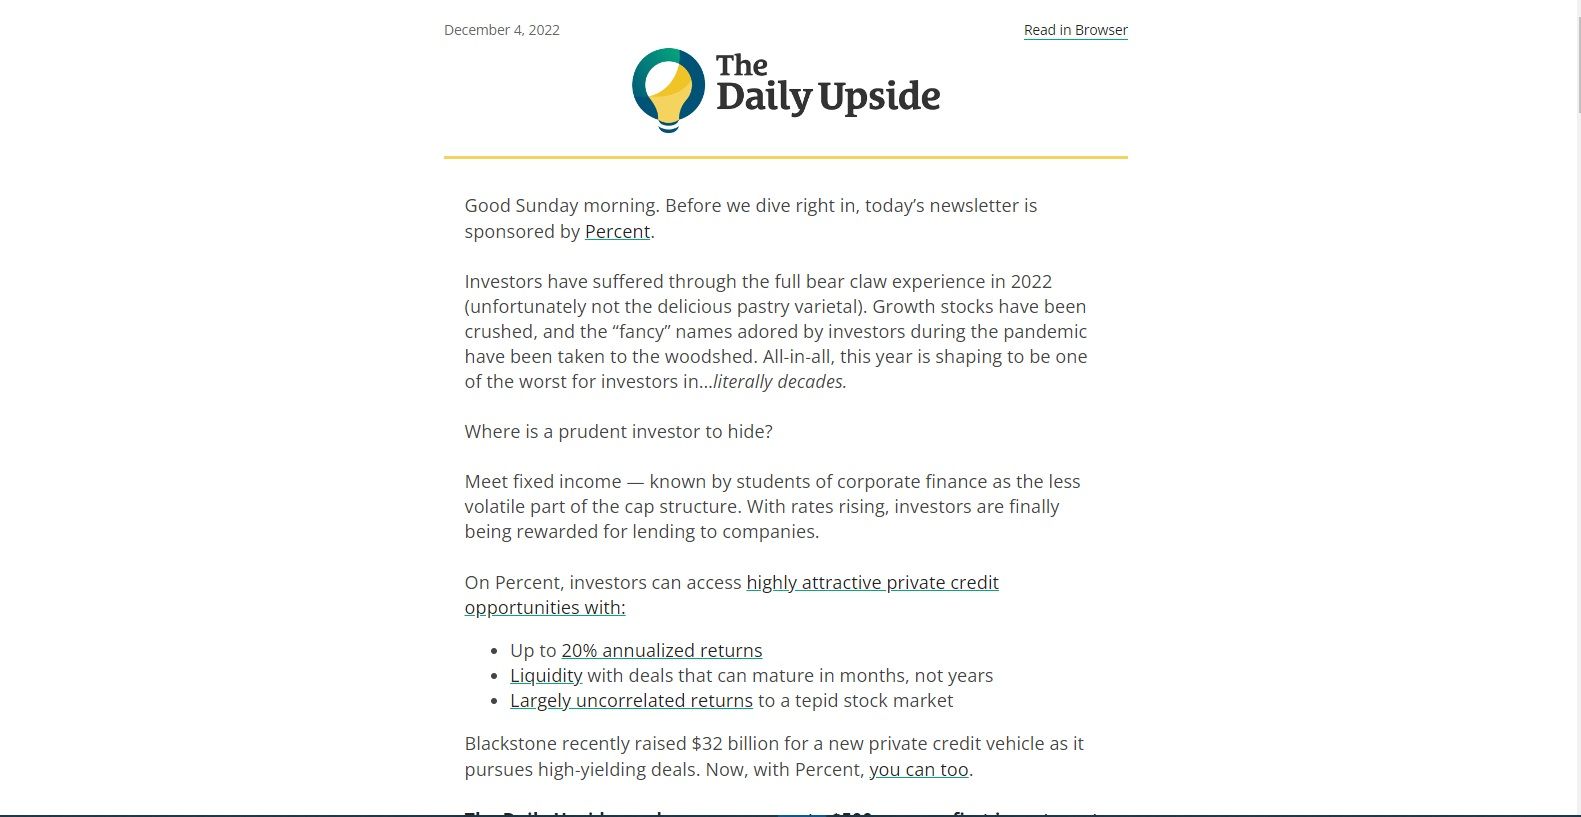 An image showing The Daily Upside newsletter